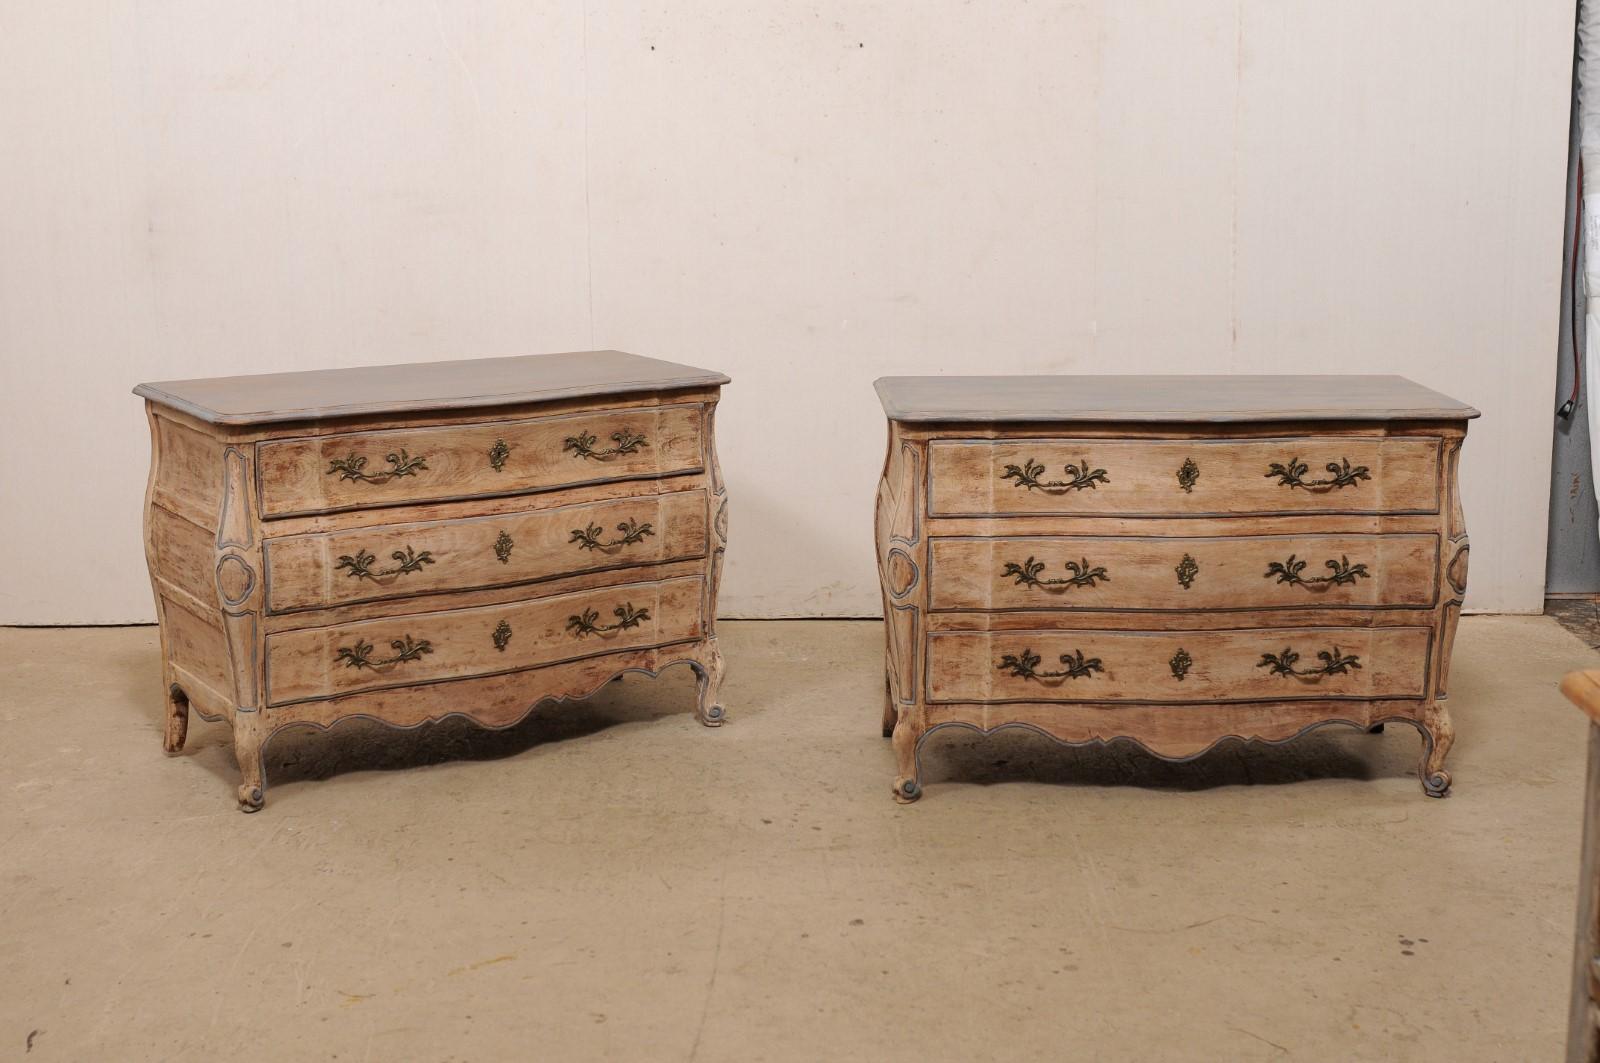 A pair of French-style serpentine chests from American furniture maker John Widdicomb, circa 1960's. This pair of commodes have been designed with French influences, and each feature slightly overhanging tops, with rounded corners, and whose shape